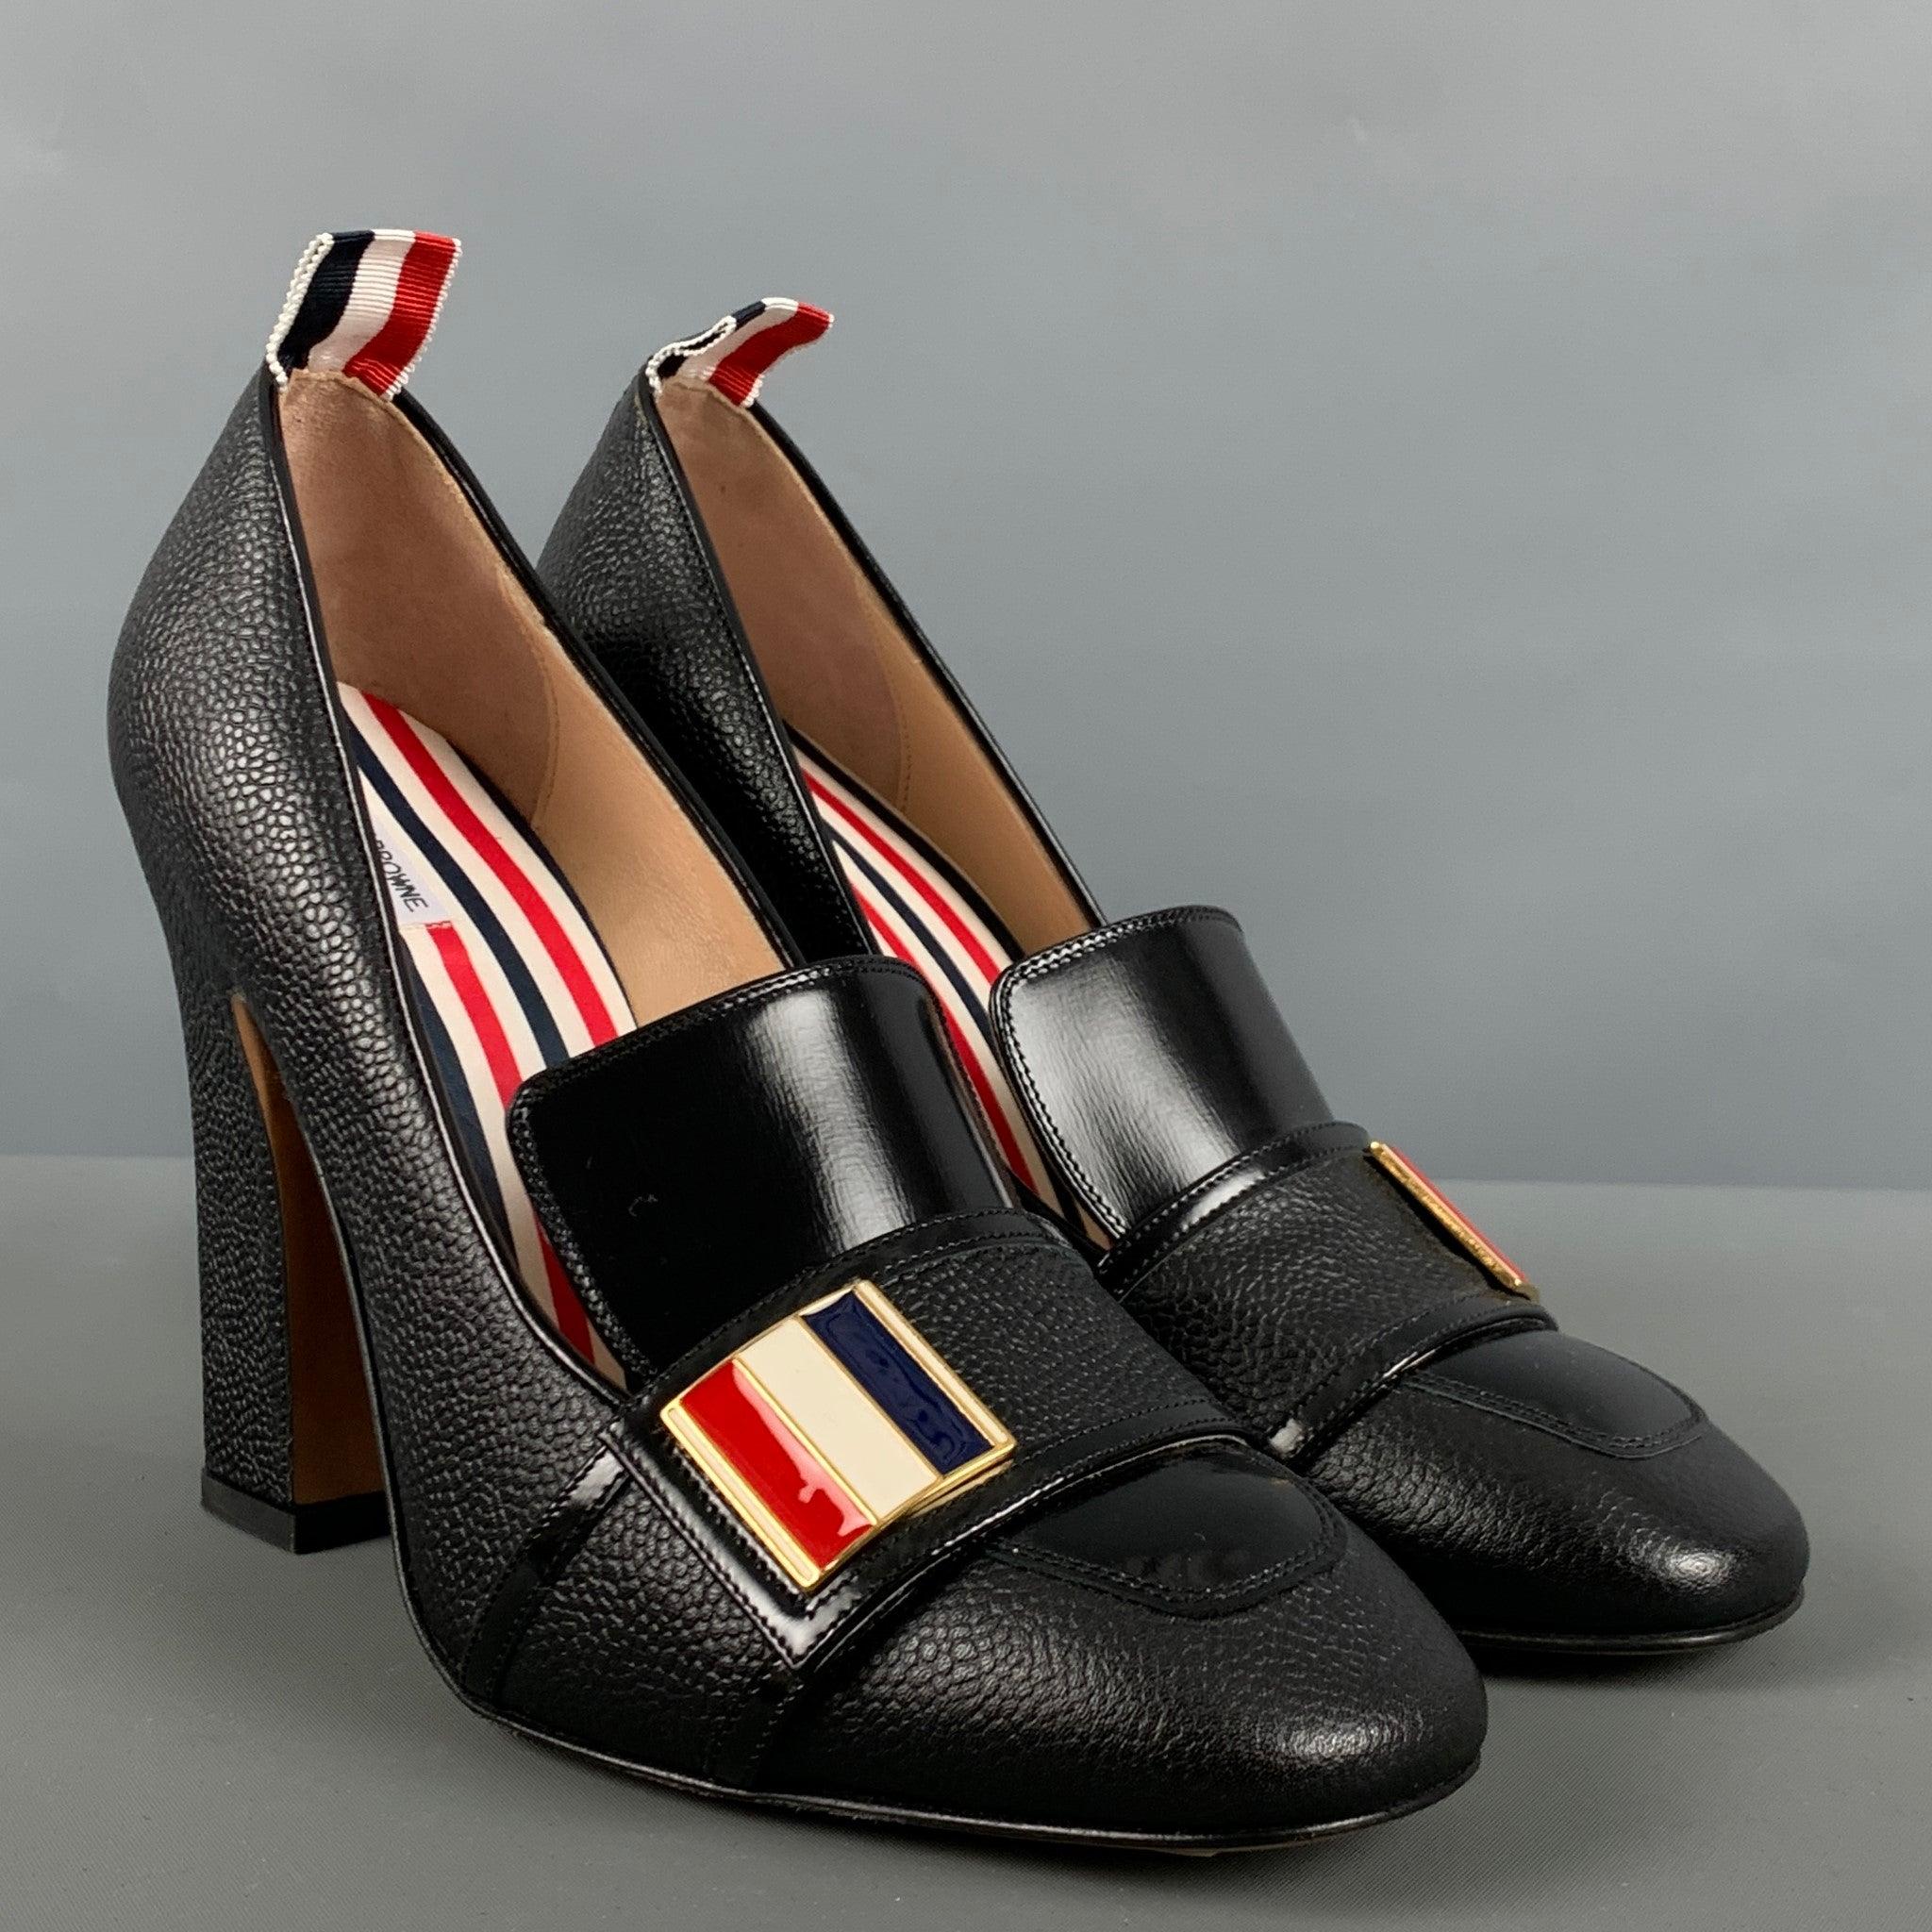 THOM BROWNE
 pumps comes in a black pebble leather featuring a red, white and blue hardware detail, and a chunky heel. Made in Italy. Excellent Pre-Owned Condition. 

Marked:   38 

Measurements: 
  Heel: 4.5 inches  
  
  
 
Reference: